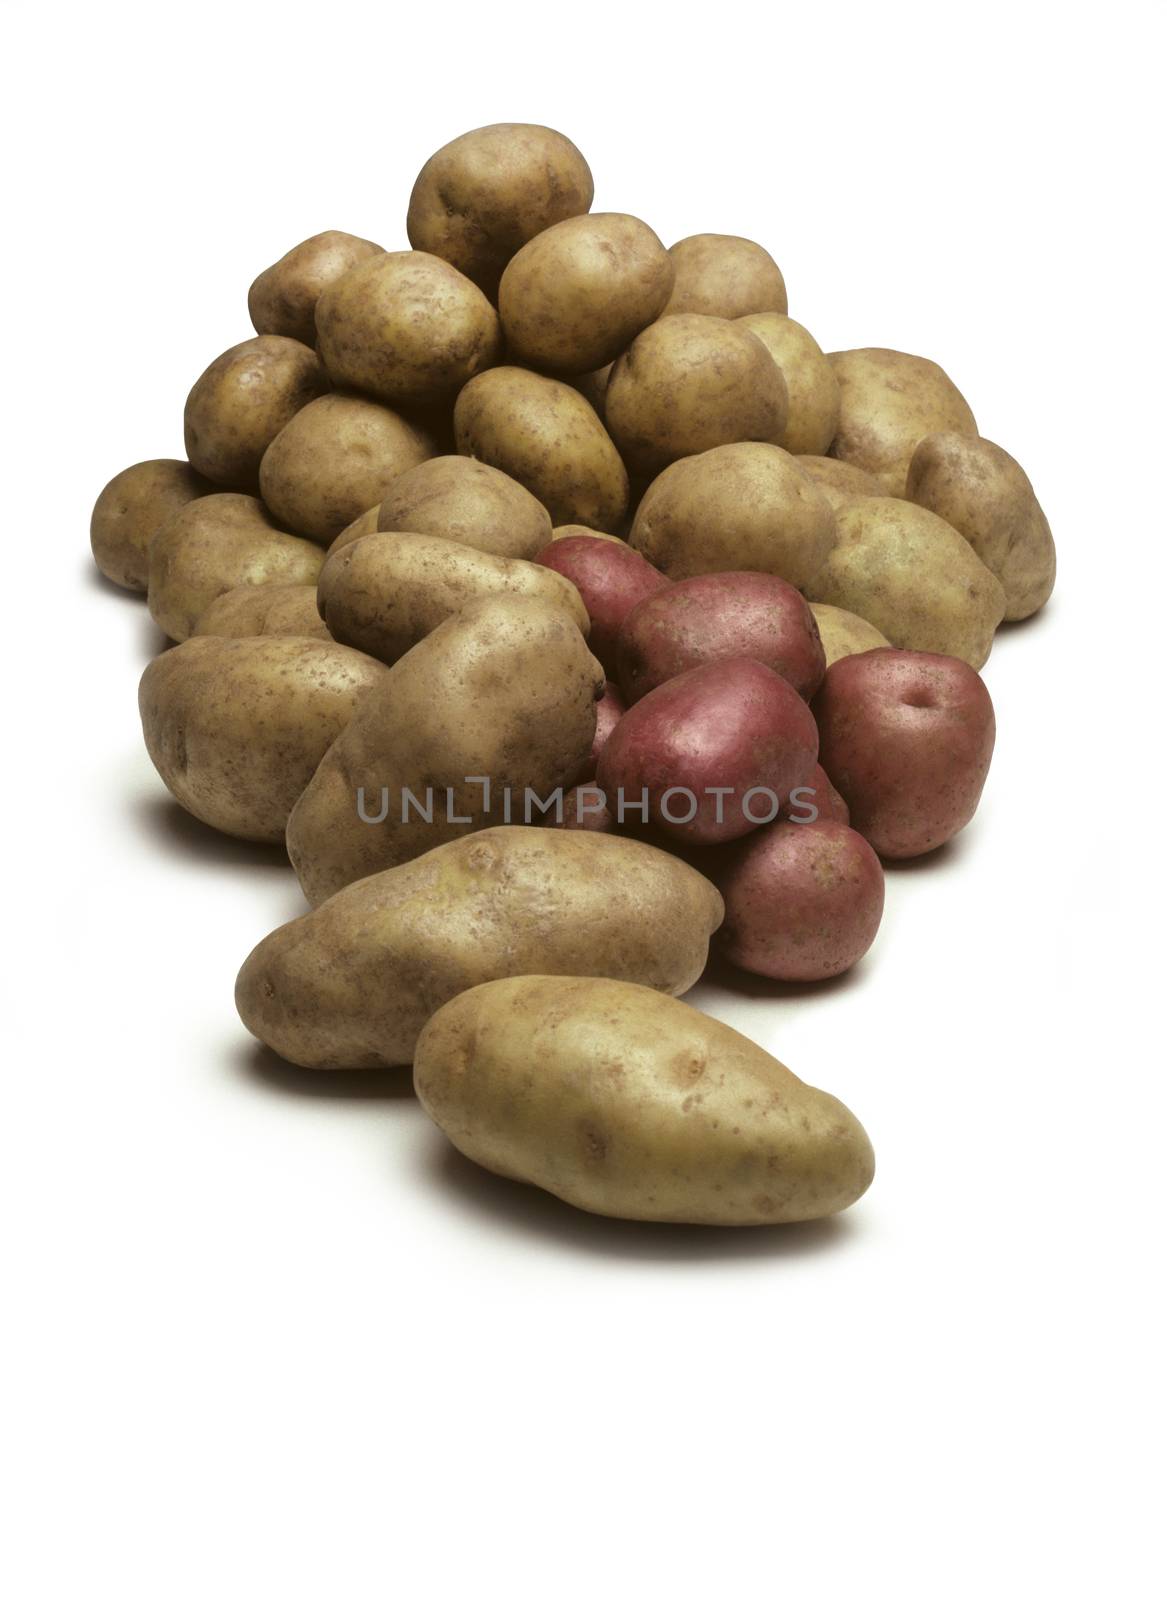 Pile of Potatoes Isolated on White by Balefire9